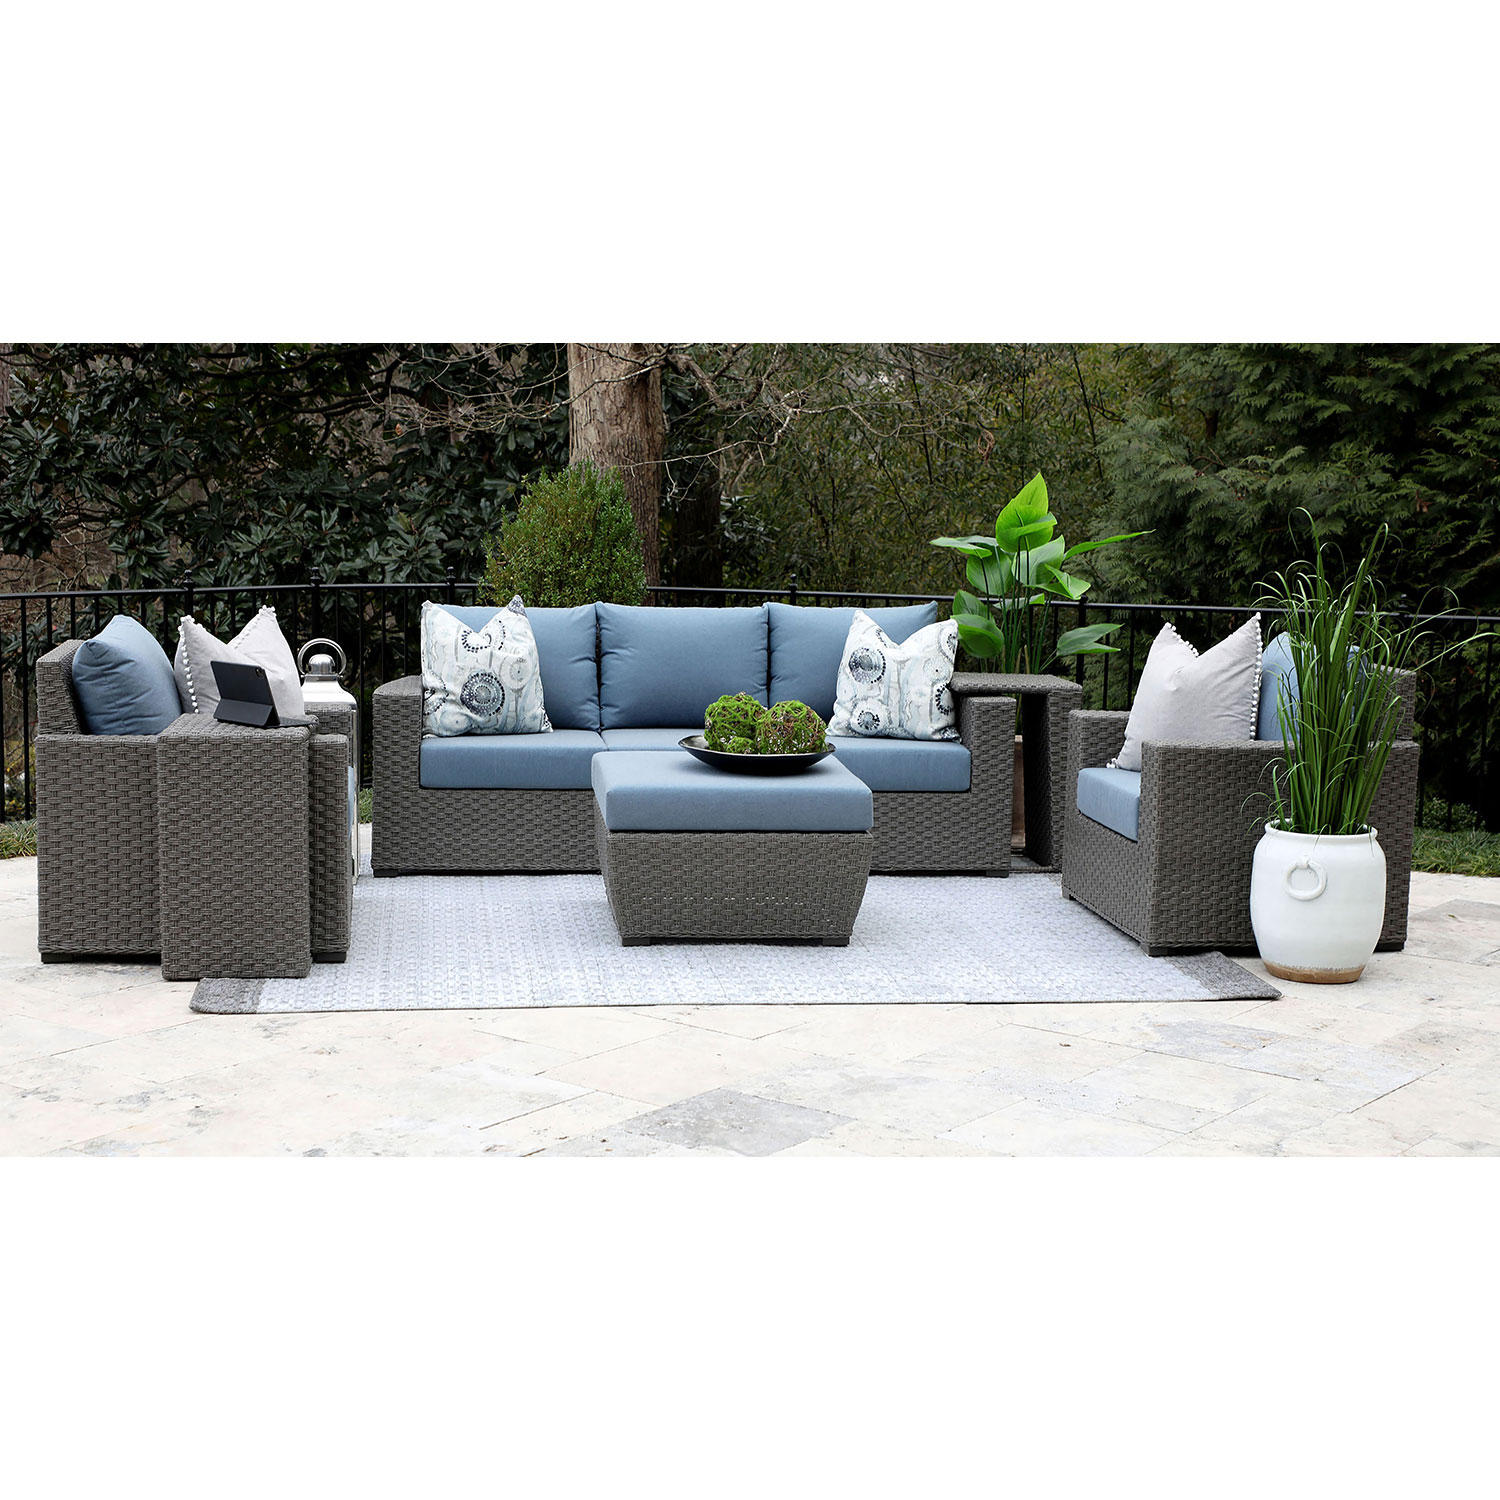 Canopy Home and Garden Cullem 6-Piece Deep Seating Patio Set with Sunbrella Fabric